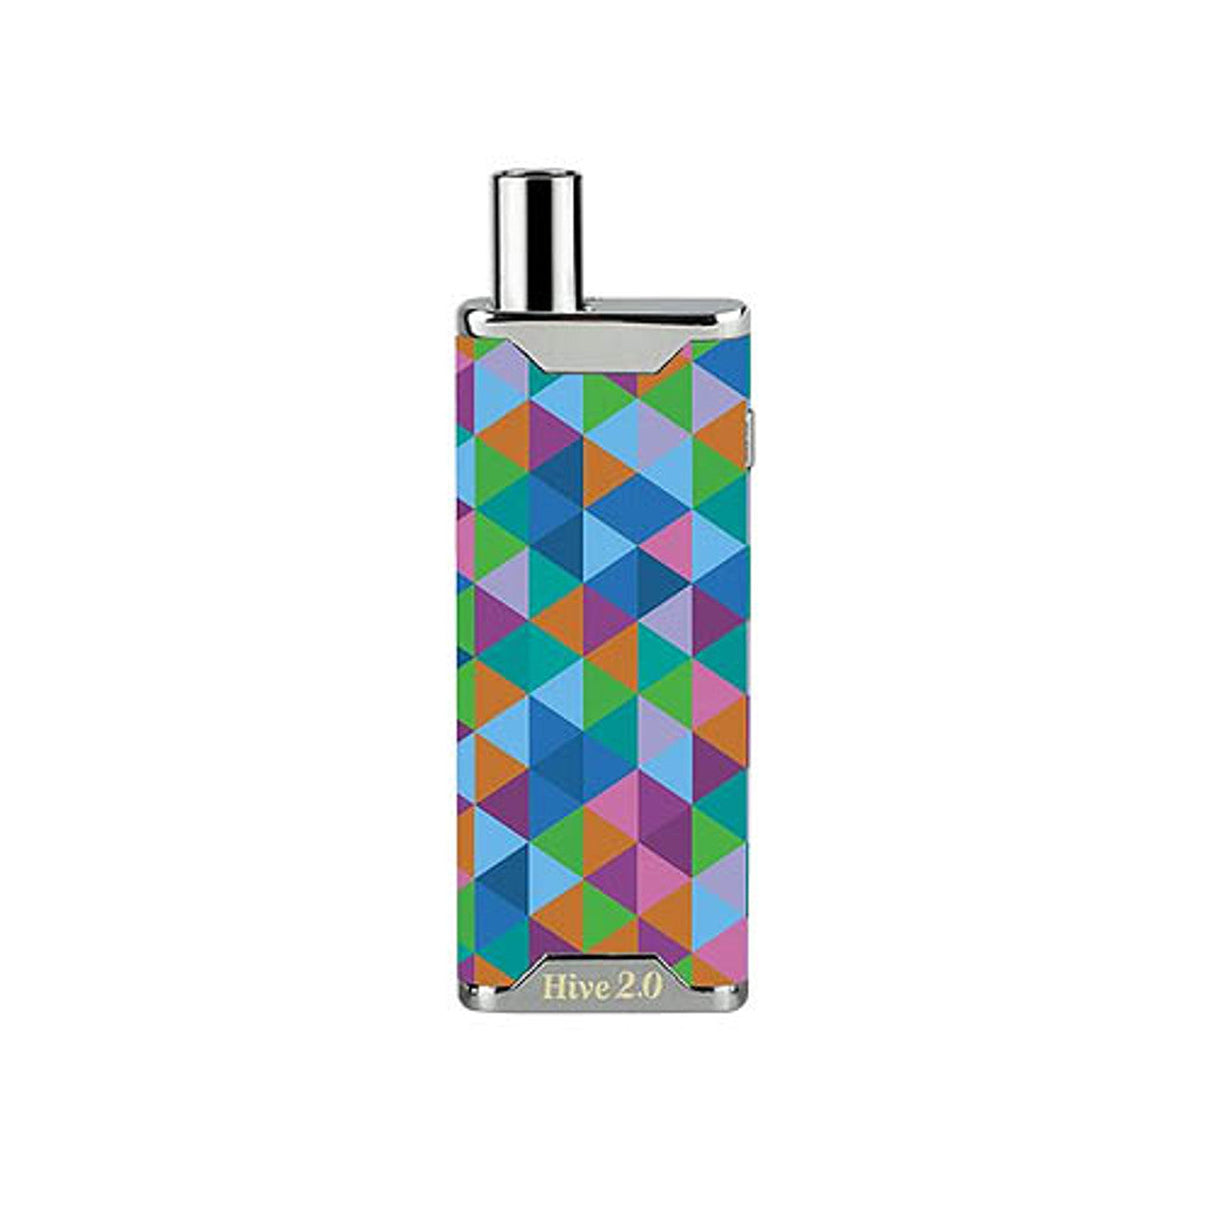 Yocan Hive 2.0 Vaporizer in Multicolor, Compact 650mAh Battery for Concentrates, Front View